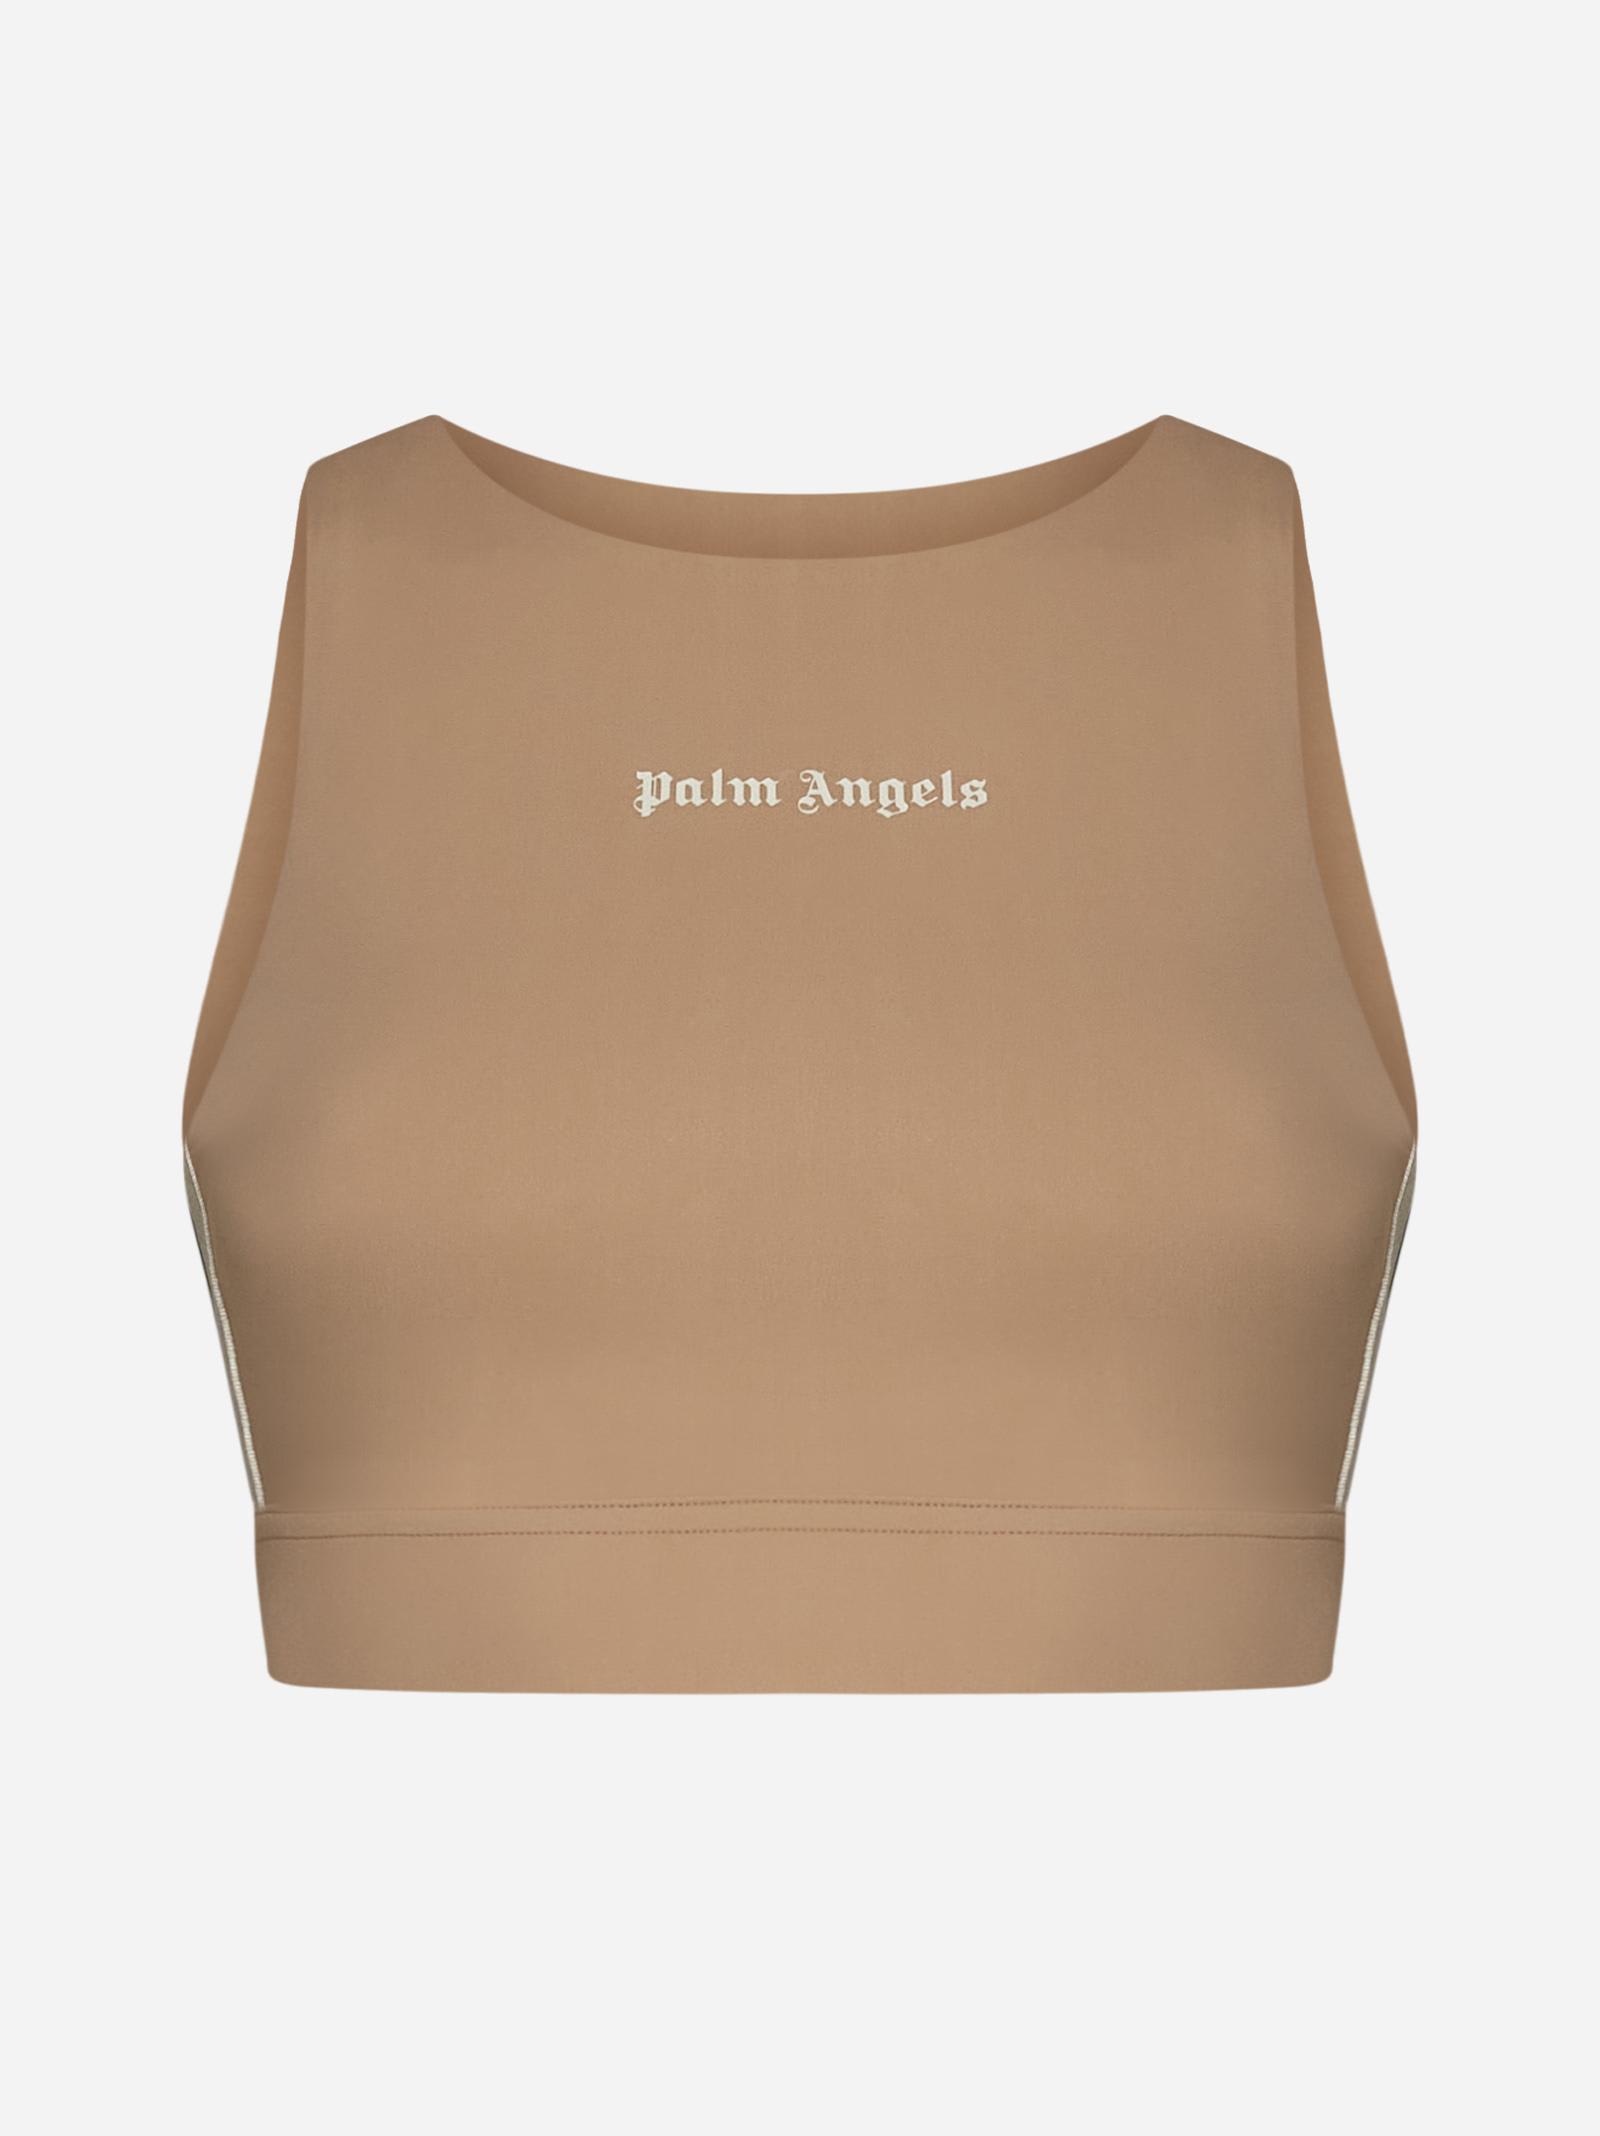 Palm Angels Top From